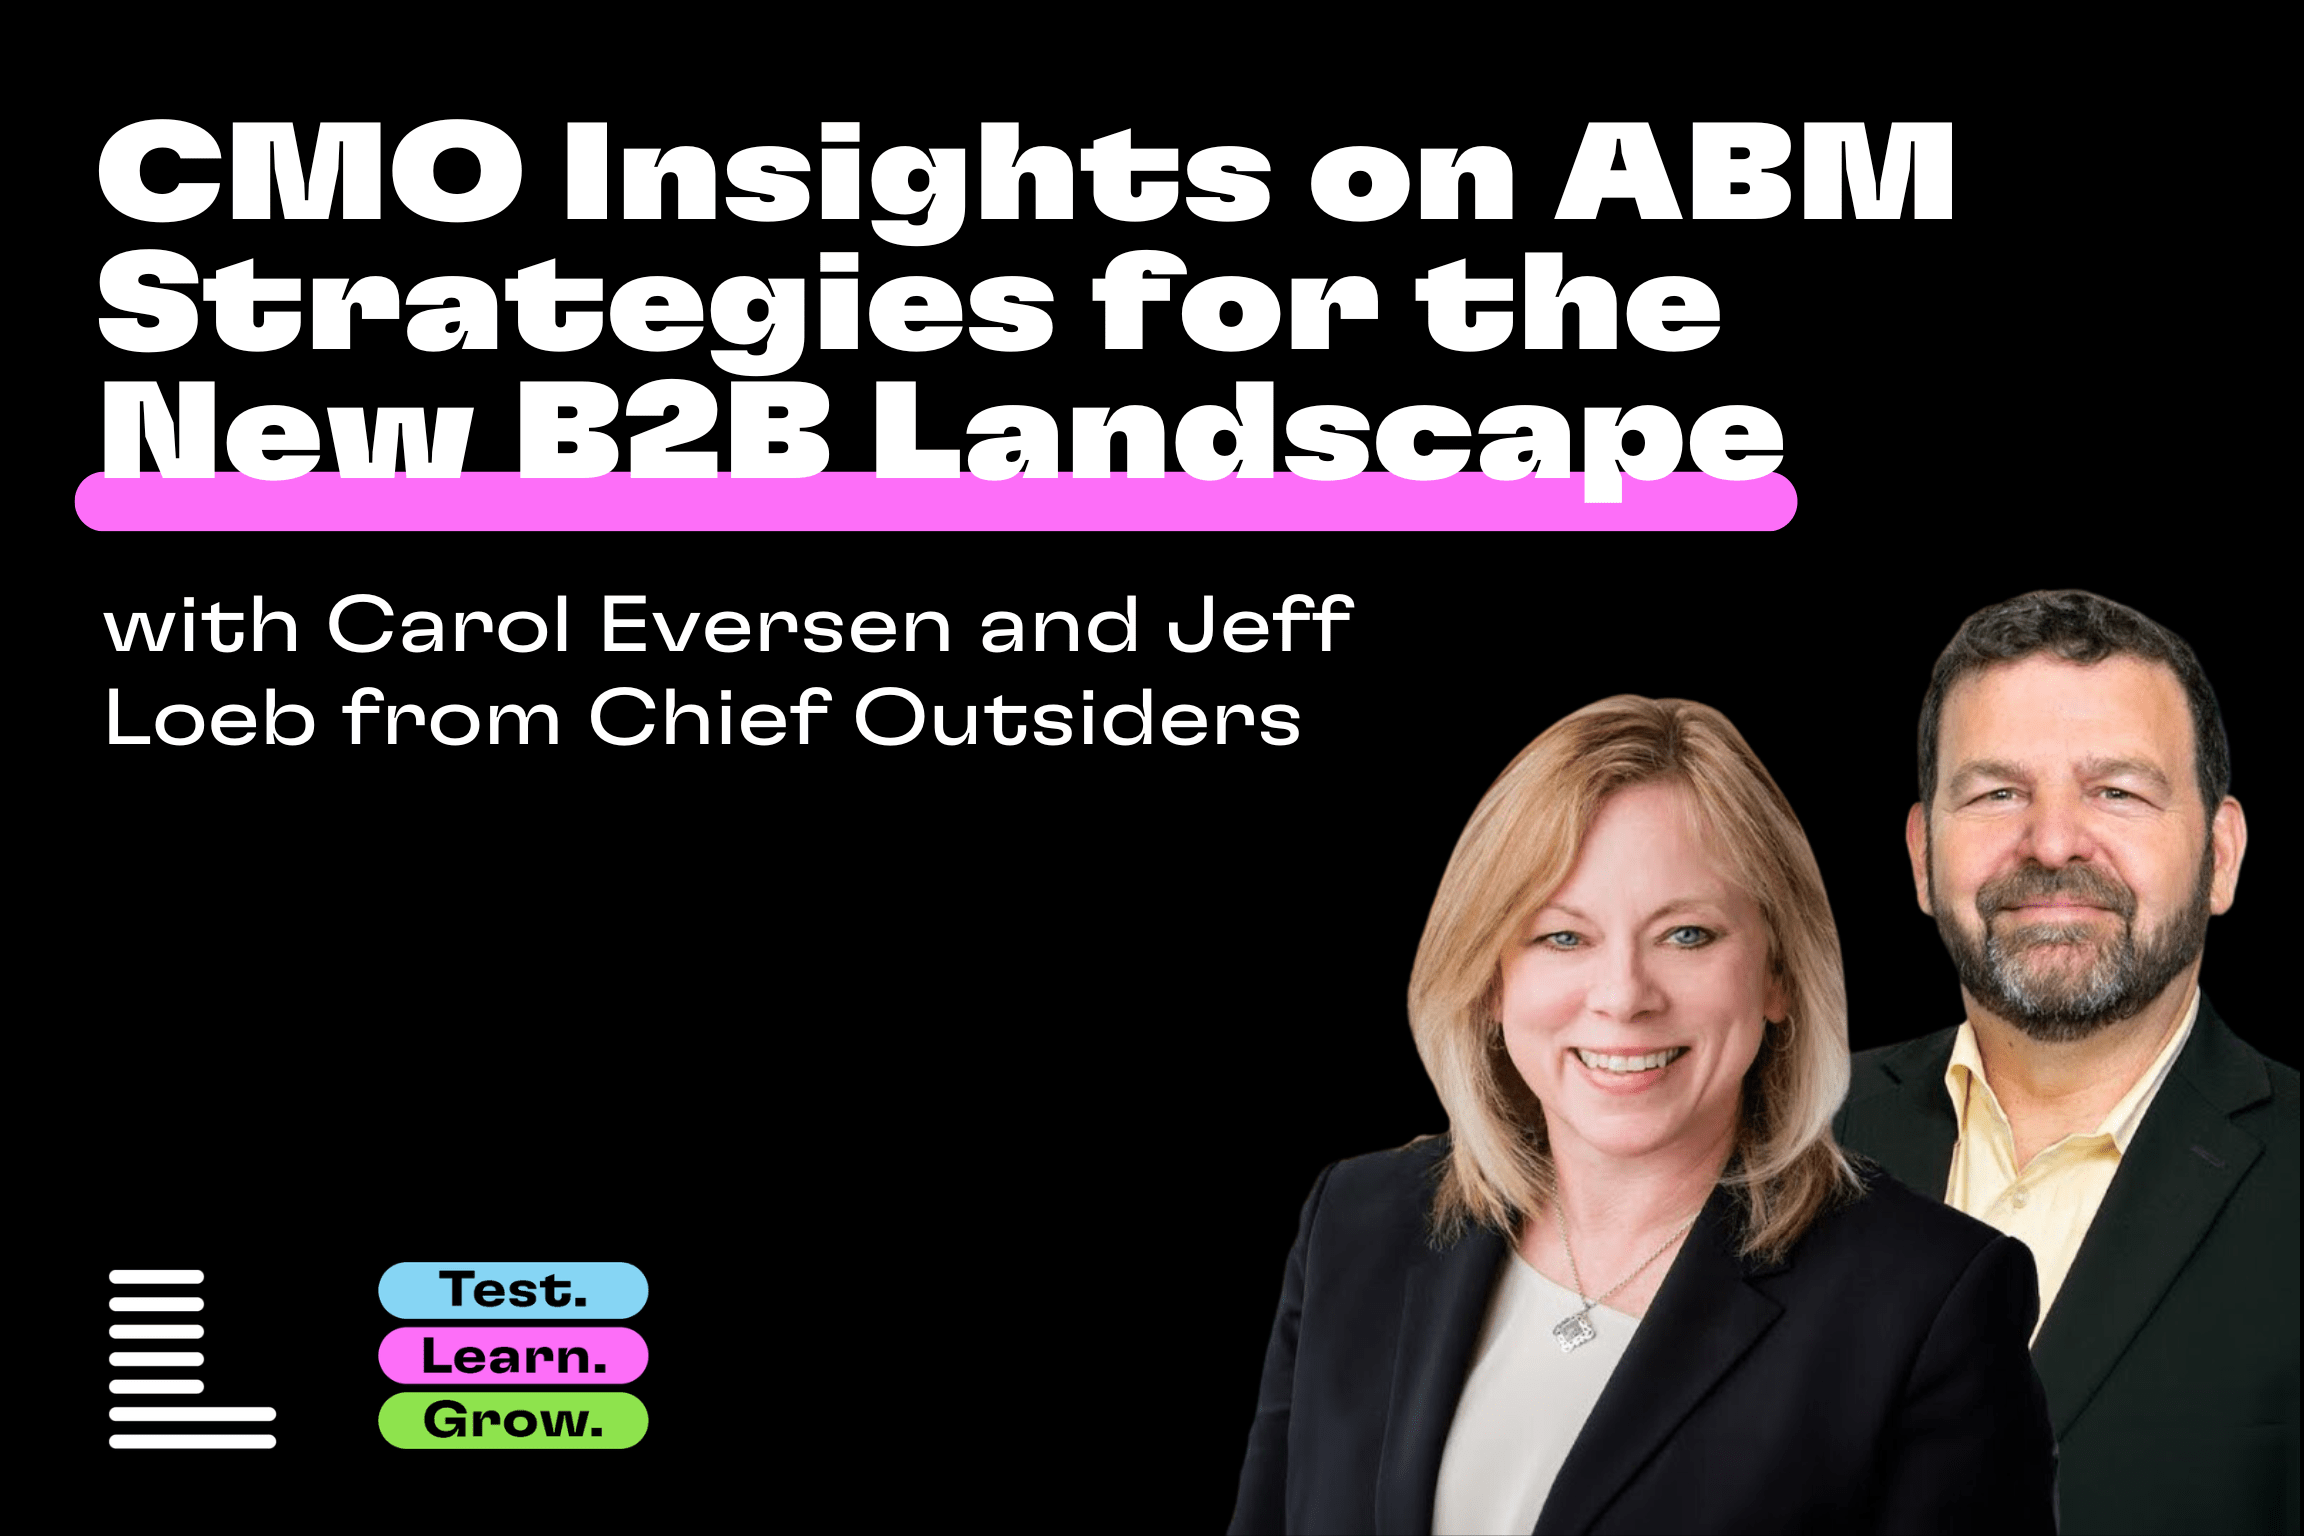 CMO Insights on ABM Strategies for the New B2B Landscape. A woman and a man are featured in the bottom right corner as the guests of this episode, Carol Eversen and Jeff Loeb from Chief Outsiders.